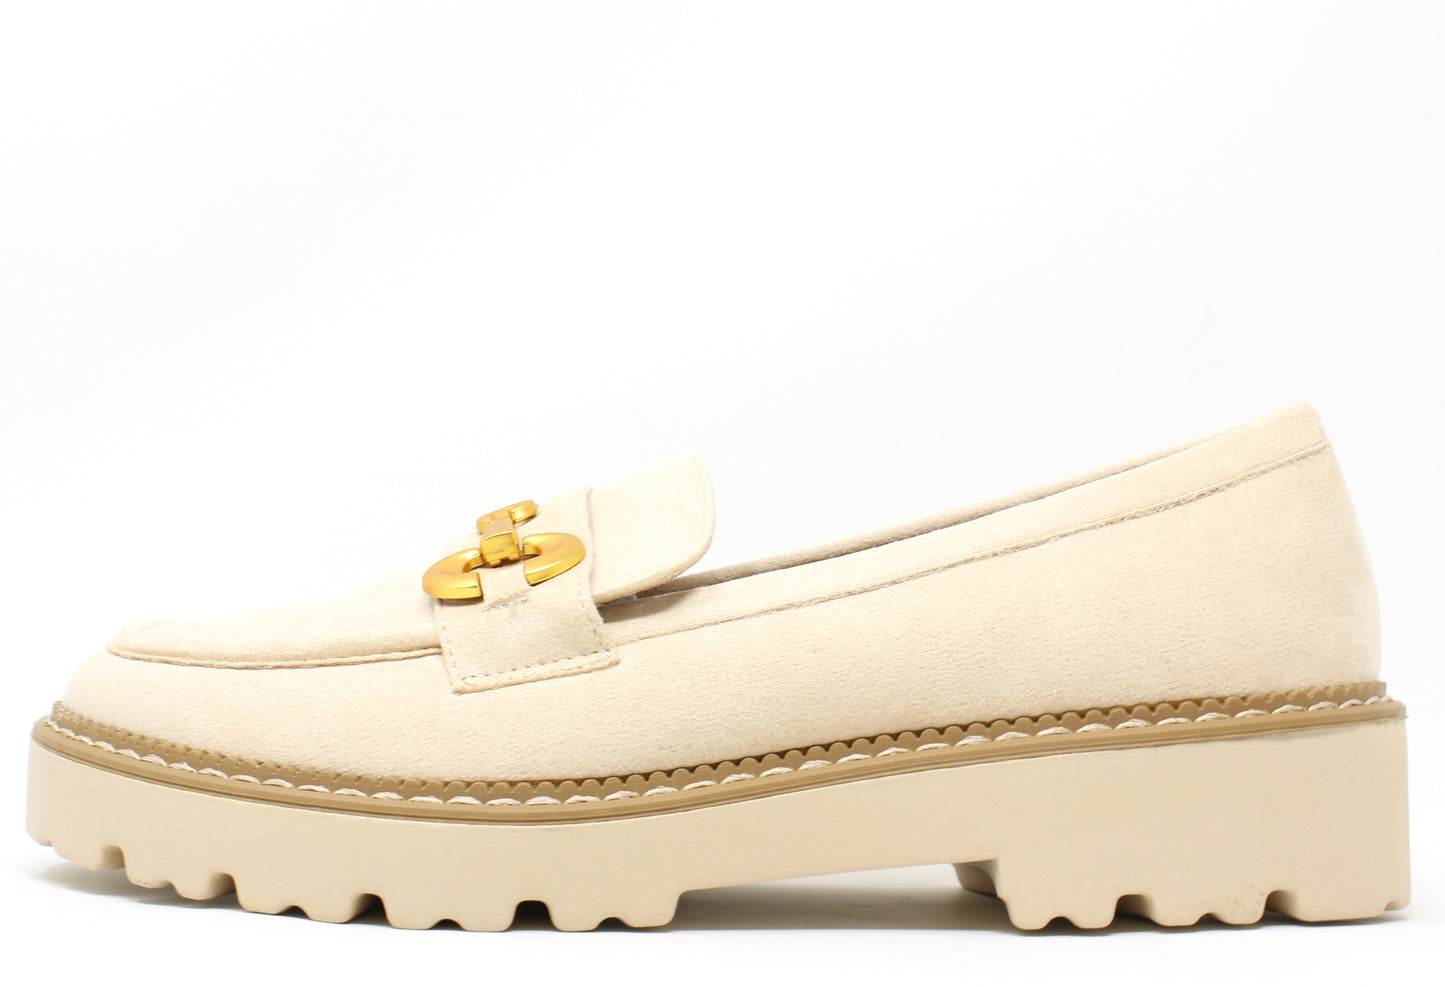 Soft Faux Suede Loafer